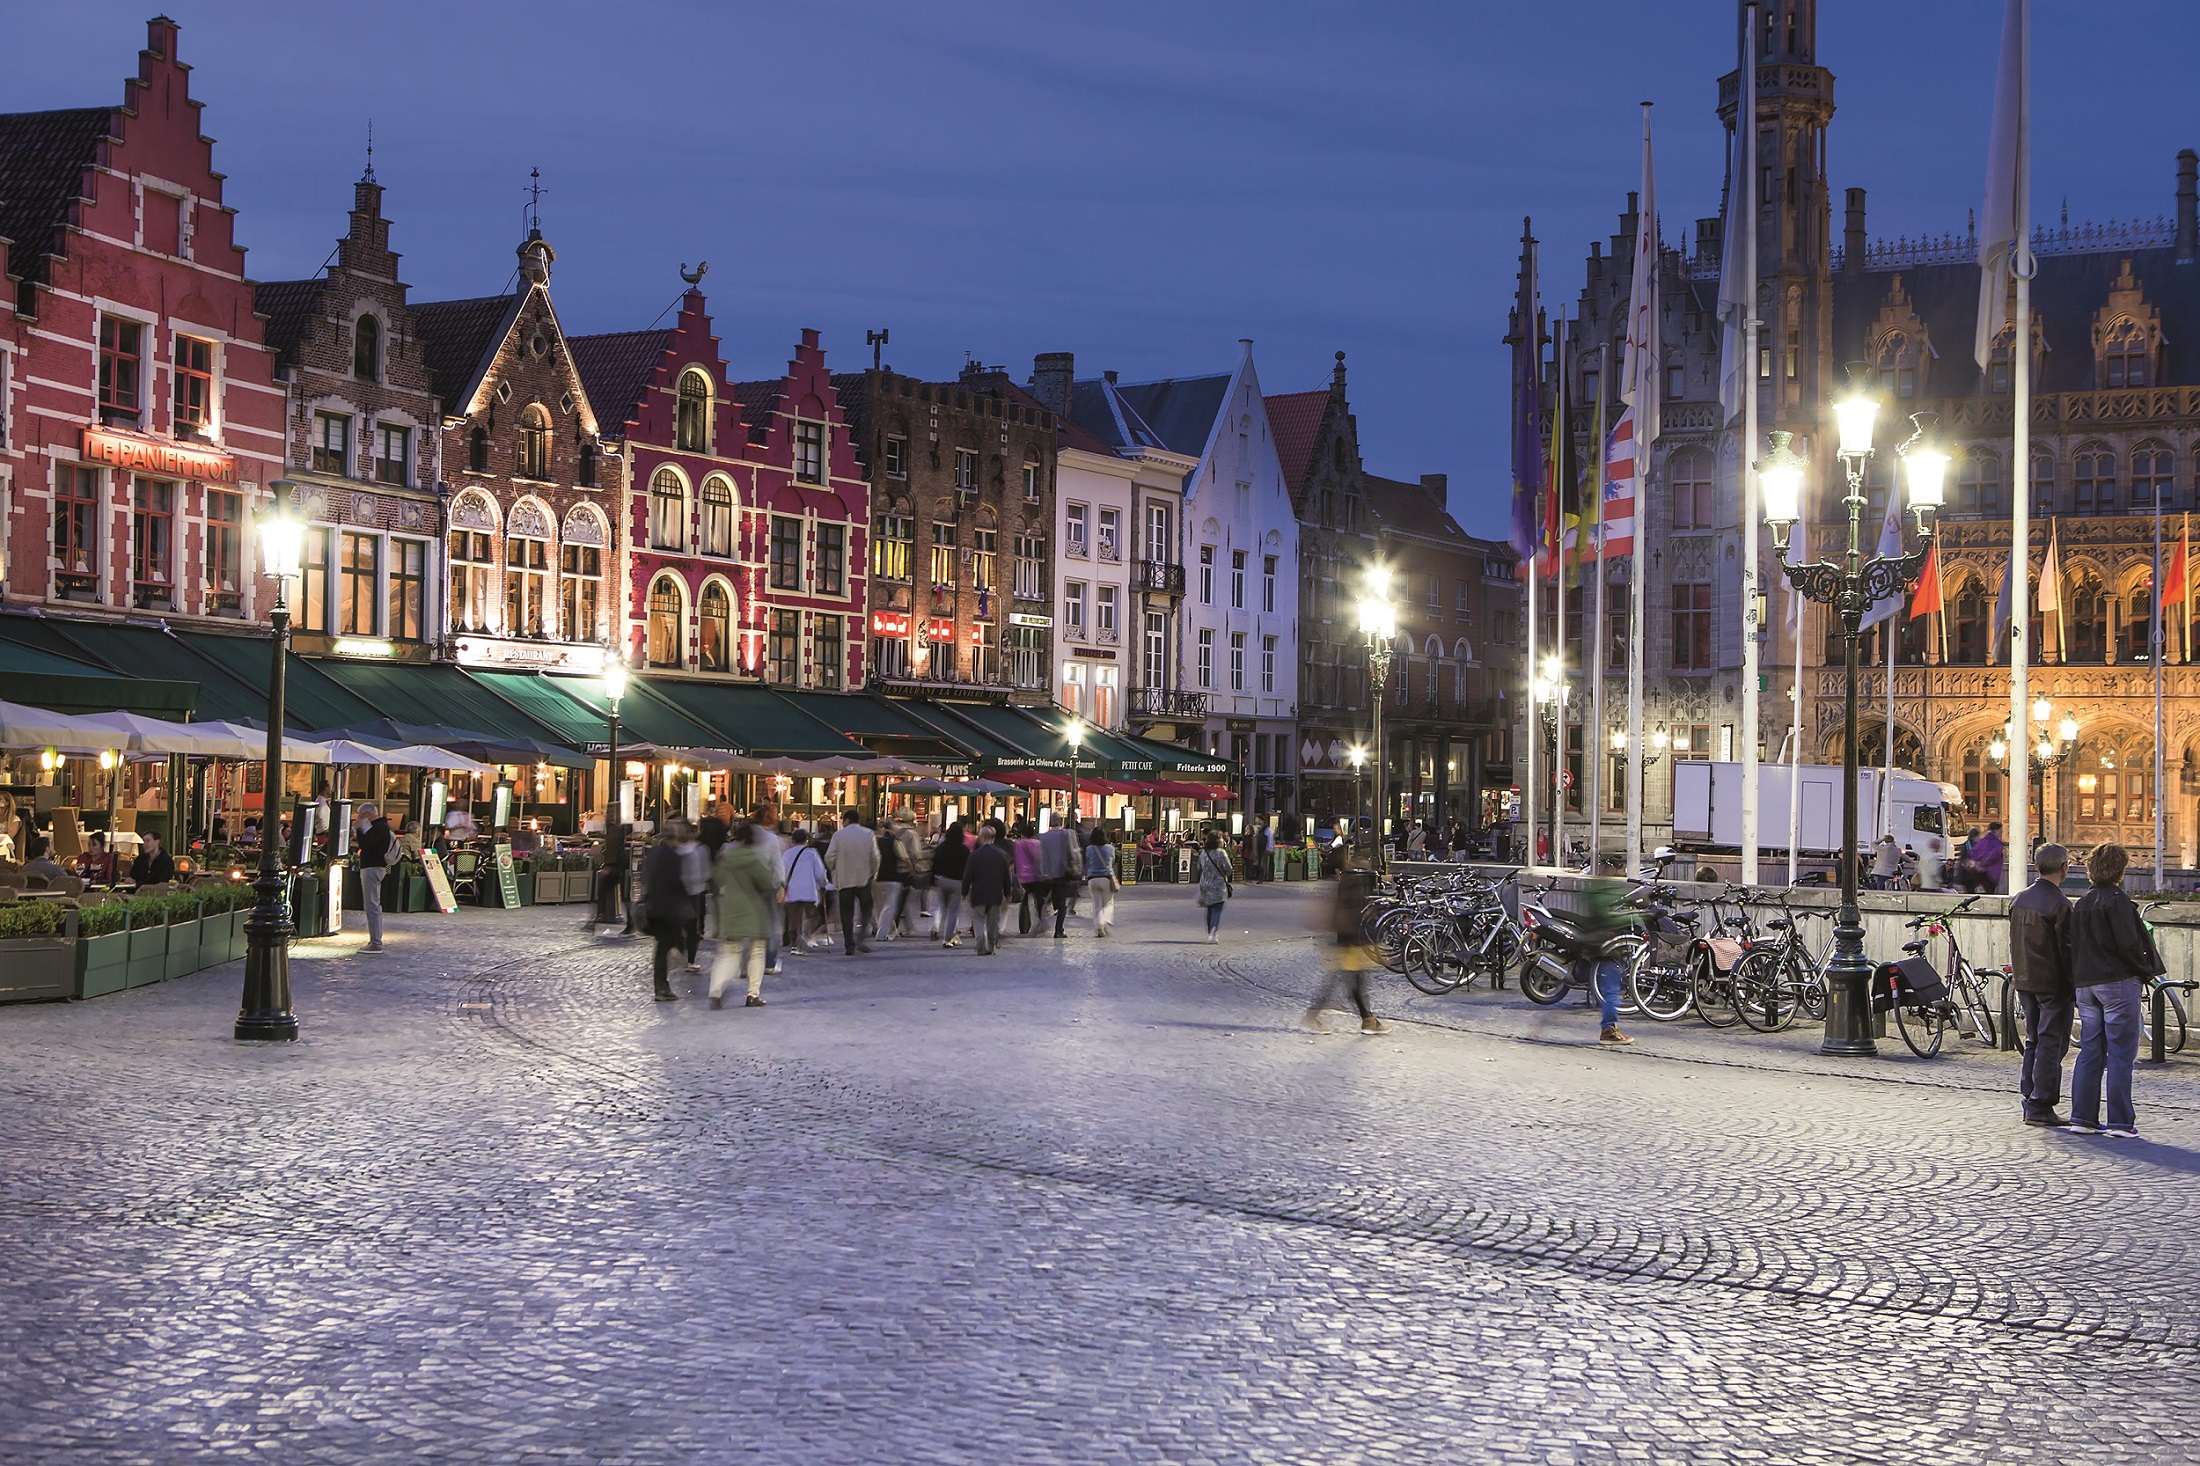 The old town city center of Bruges, Belgium.